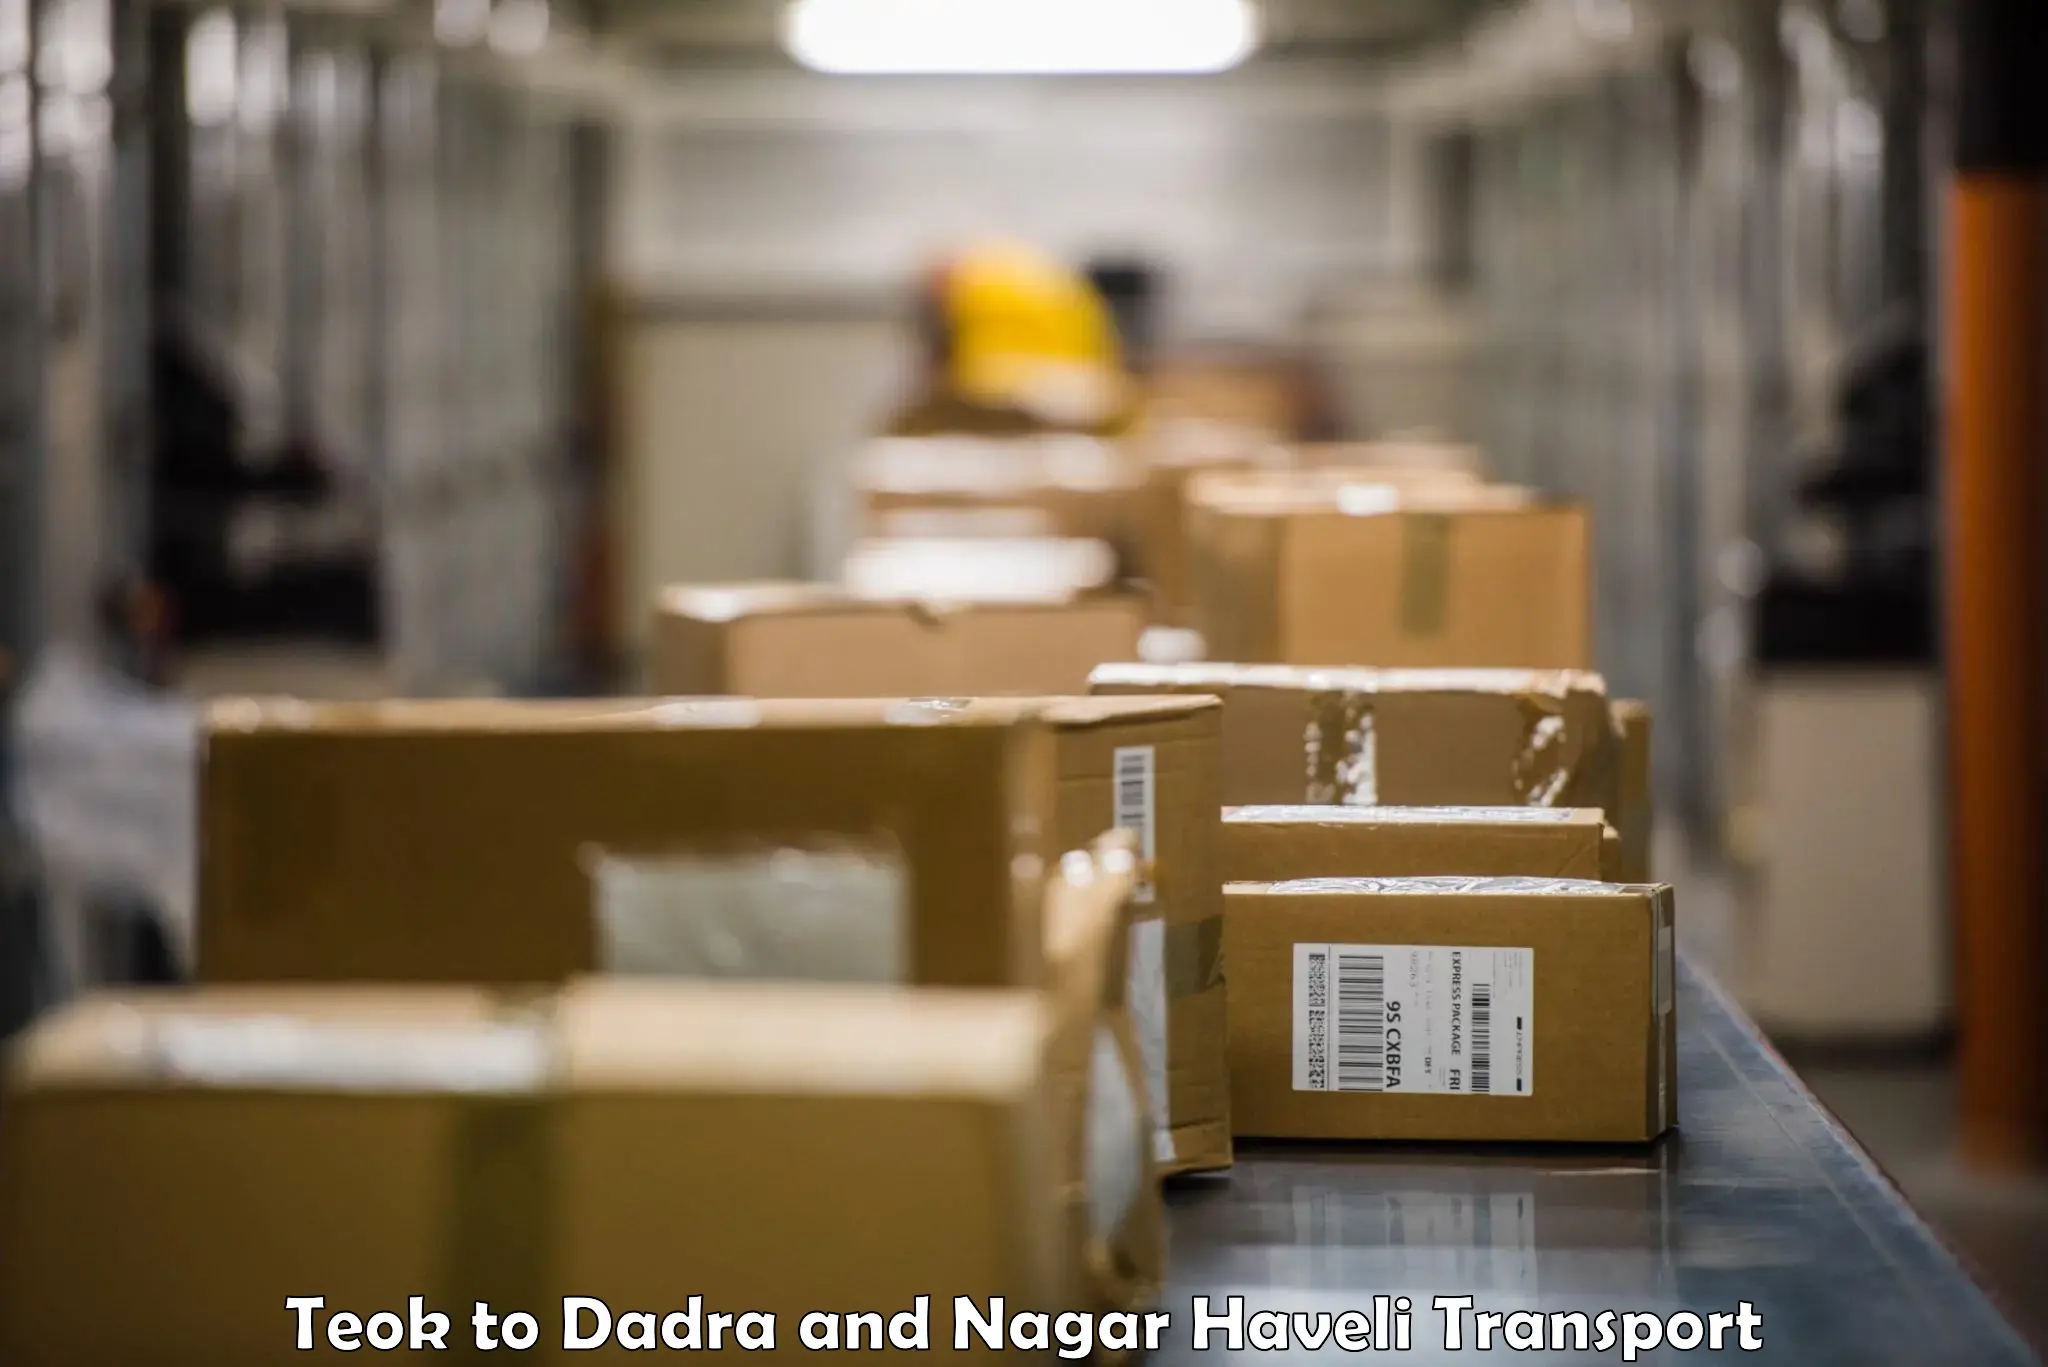 Material transport services Teok to Dadra and Nagar Haveli